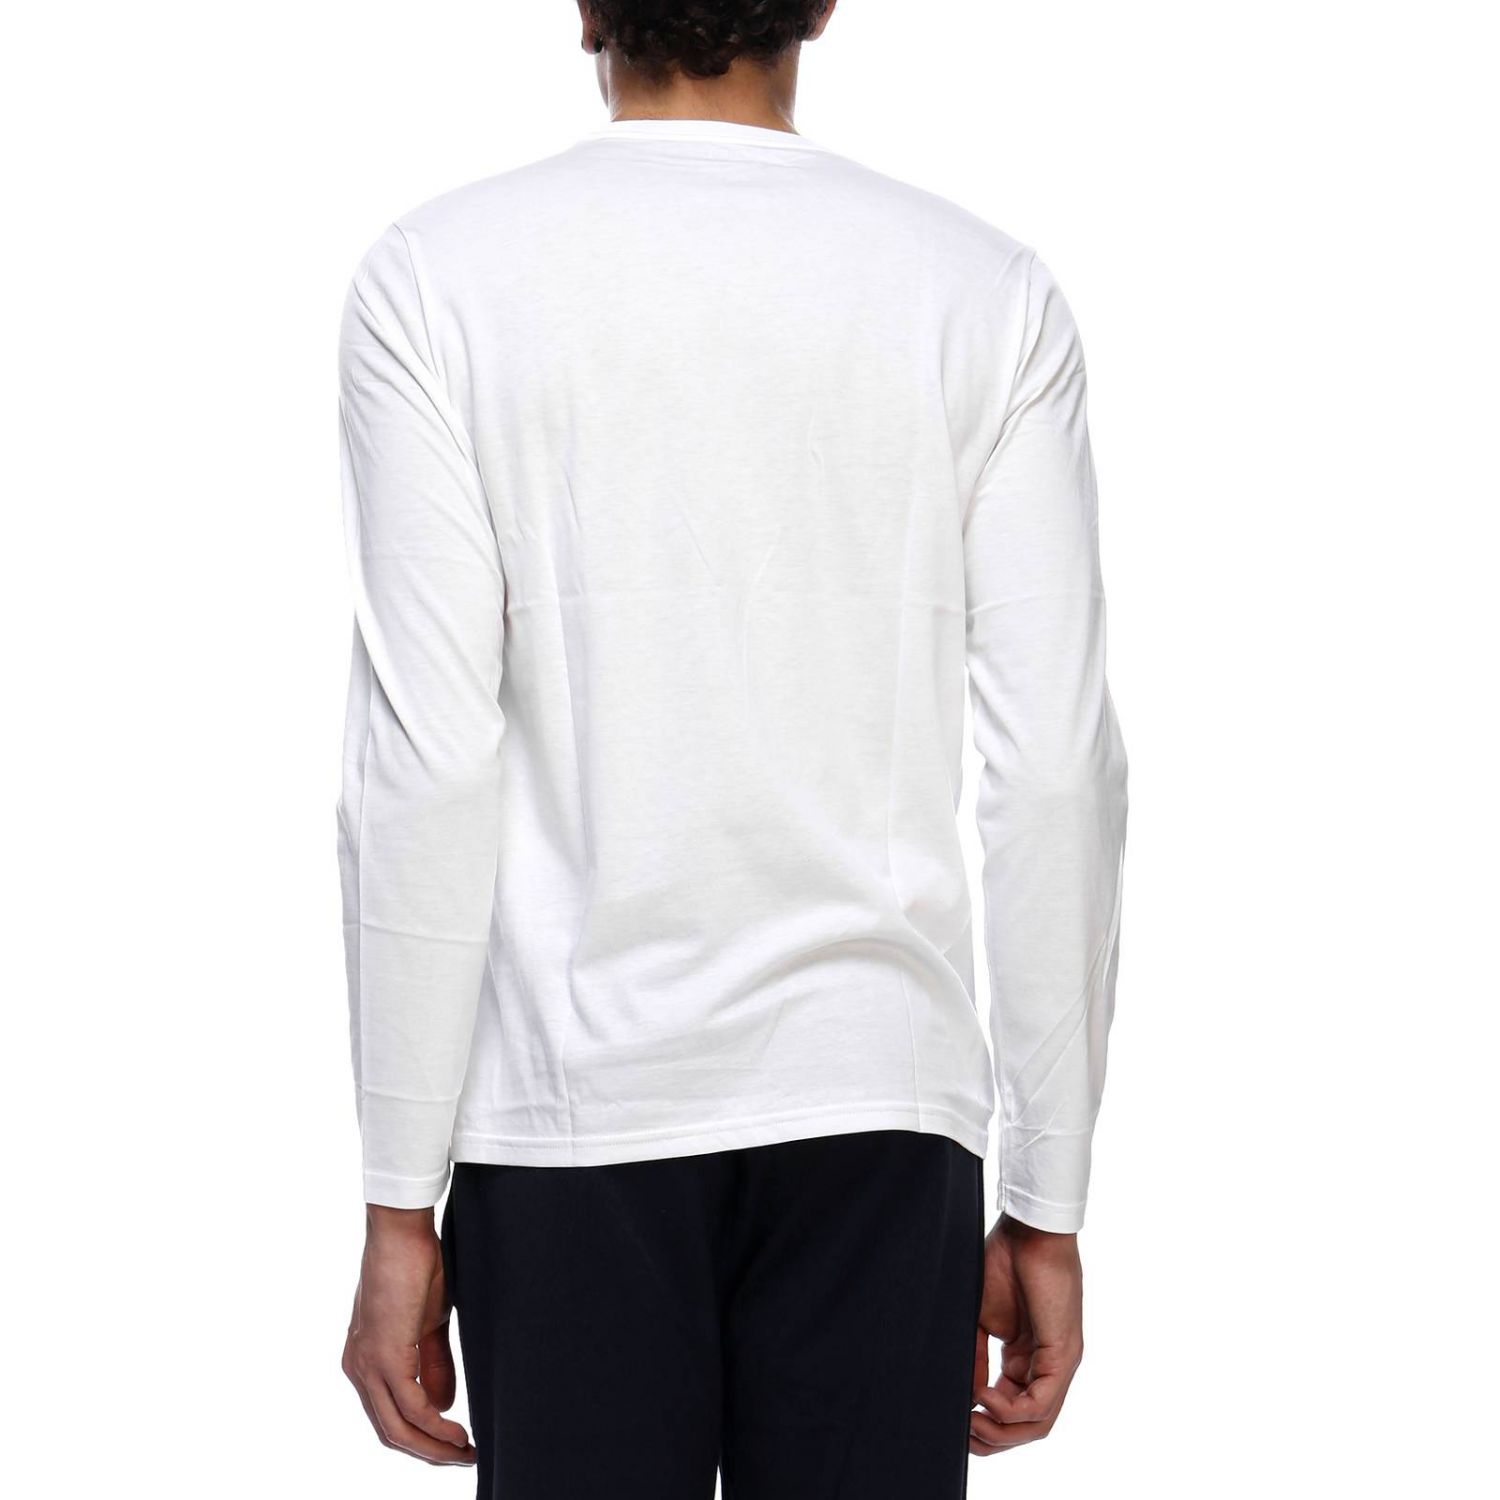 Polo Ralph Lauren Outlet: Sweater men - White | Sweater Polo Ralph ...